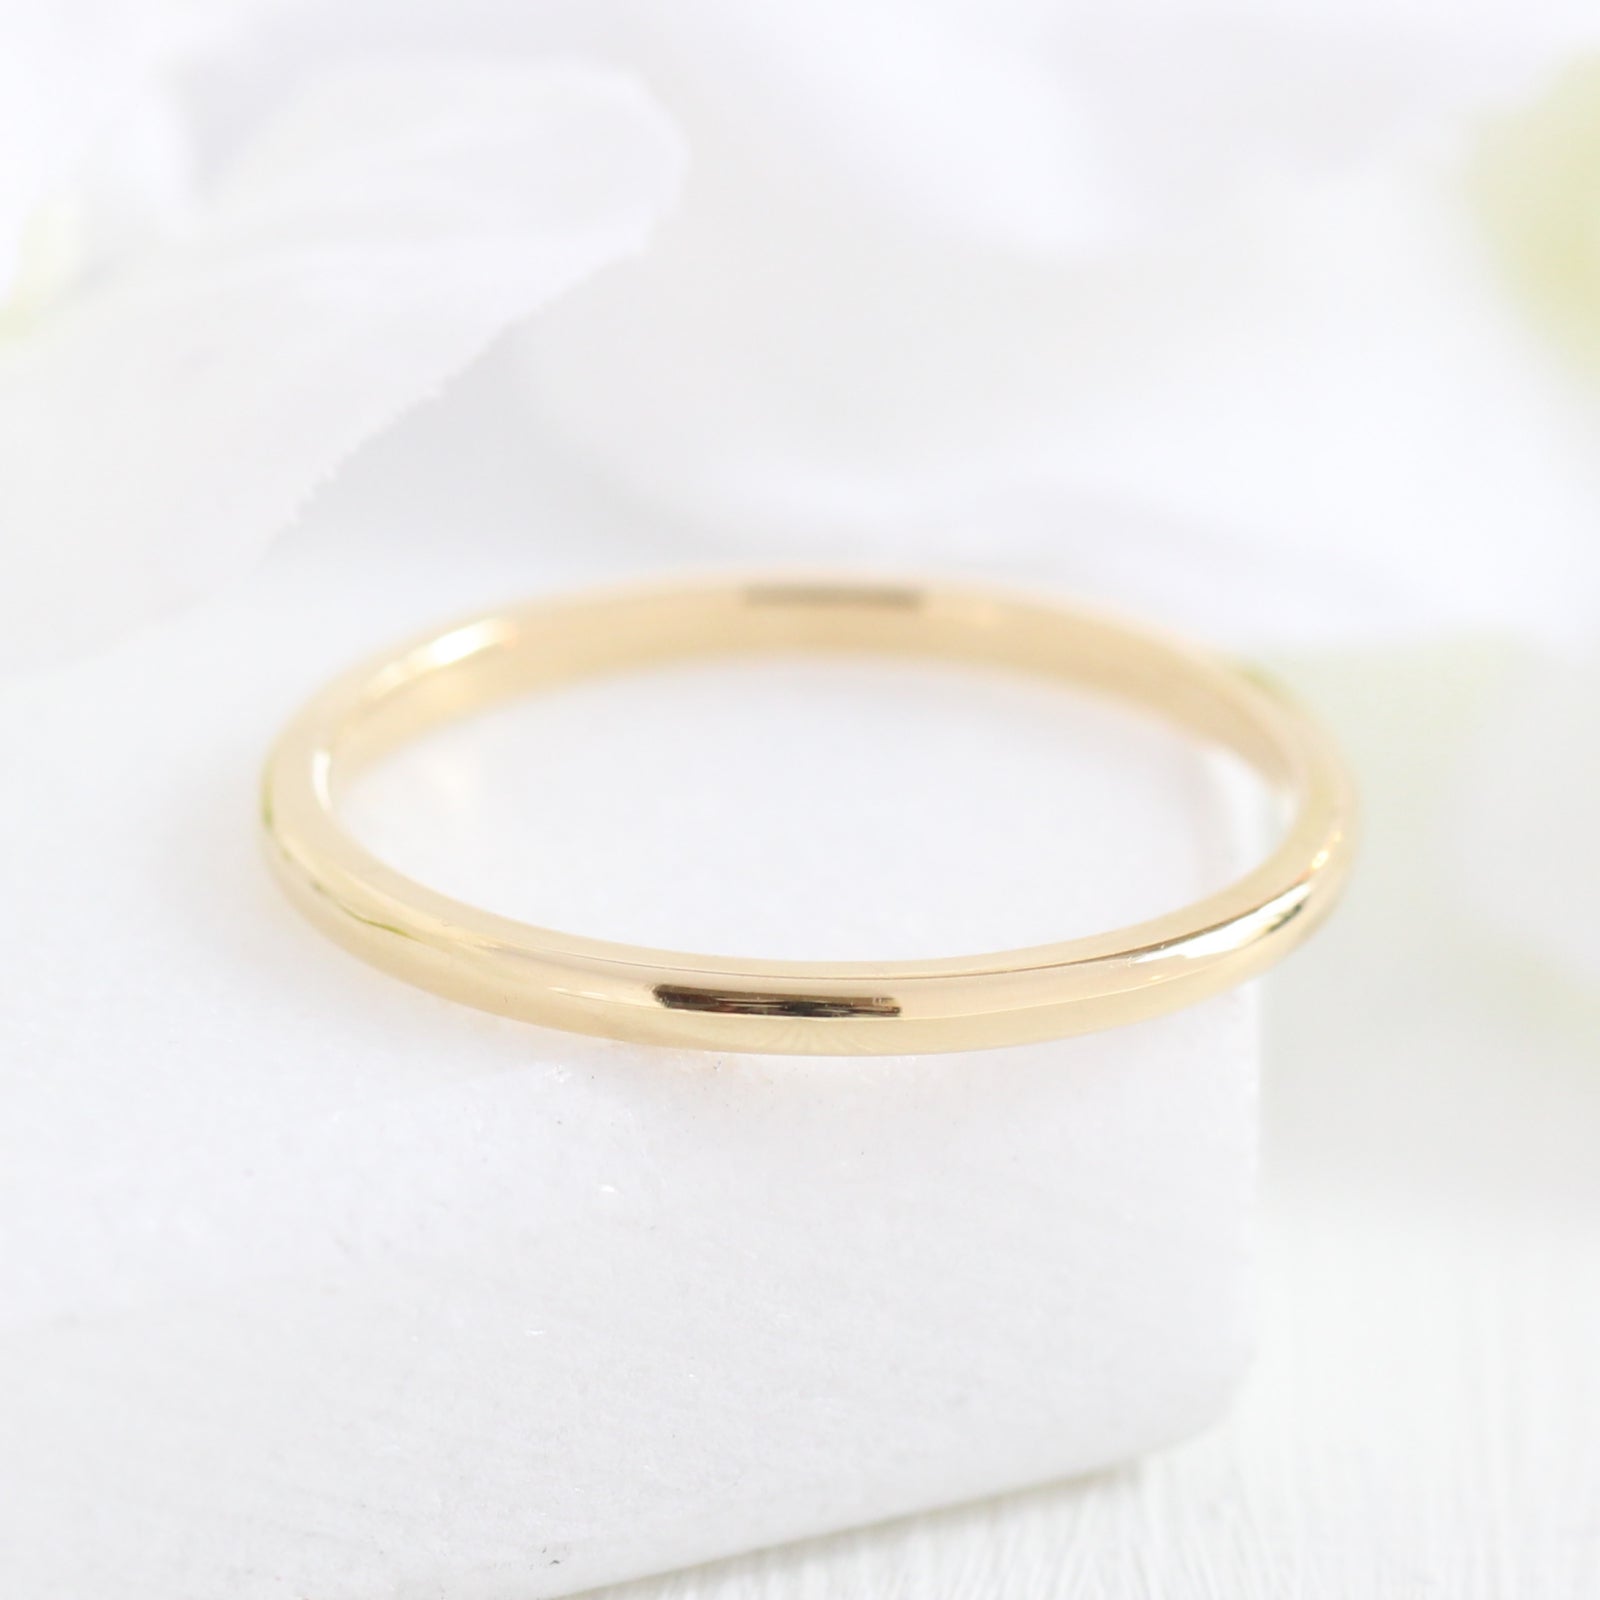 Plain gold wedding band solid 14k yellow gold ring by la more design jewelry